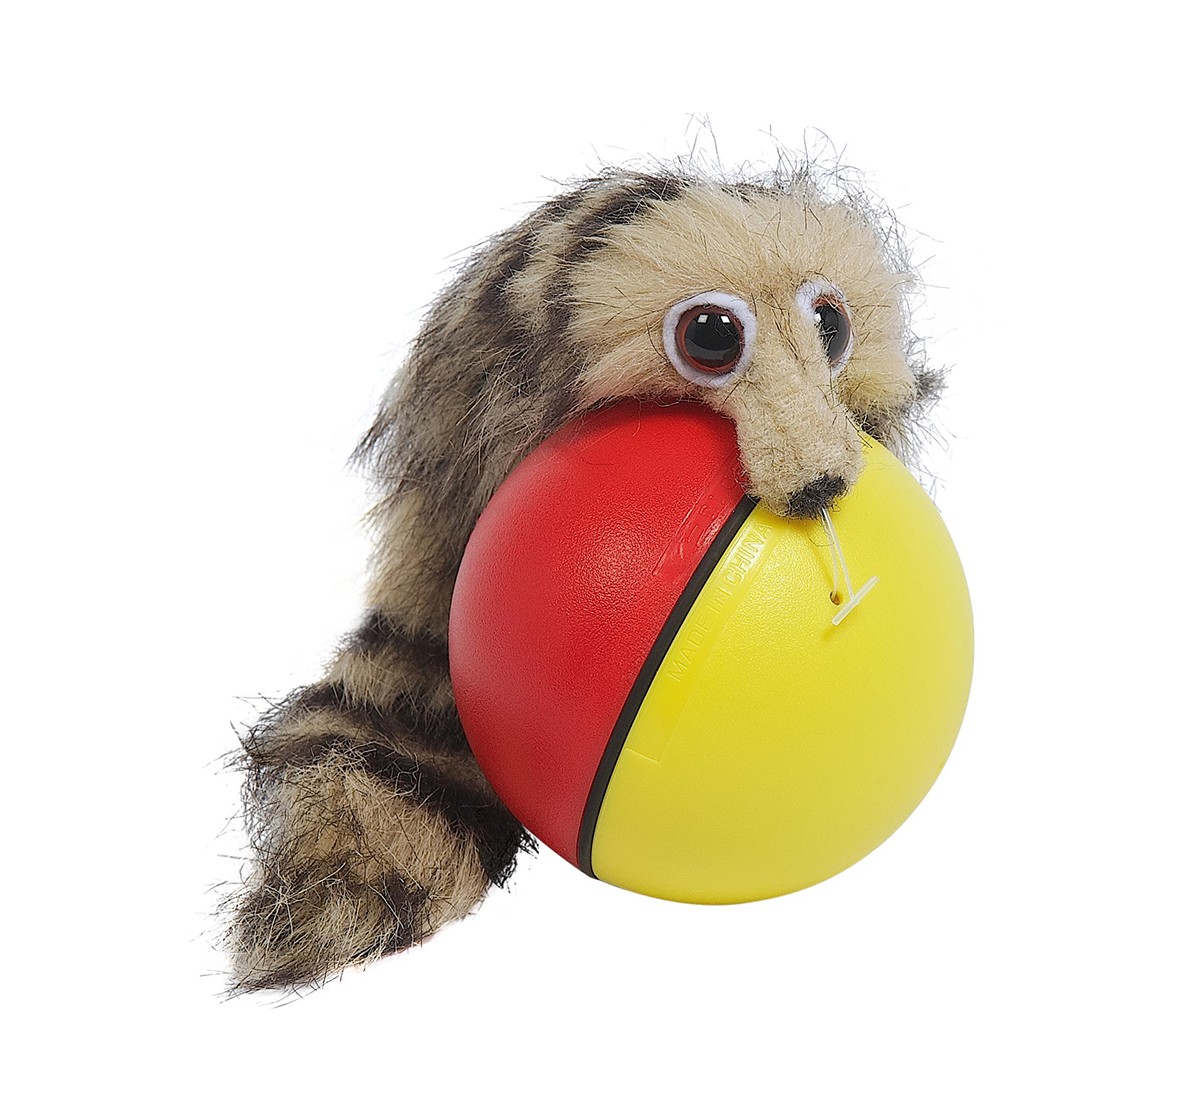 Hamleys Movers & Shakers - Weazel Ball Interactive Soft Toys for Kids age 3Y+ - 5 Cm 